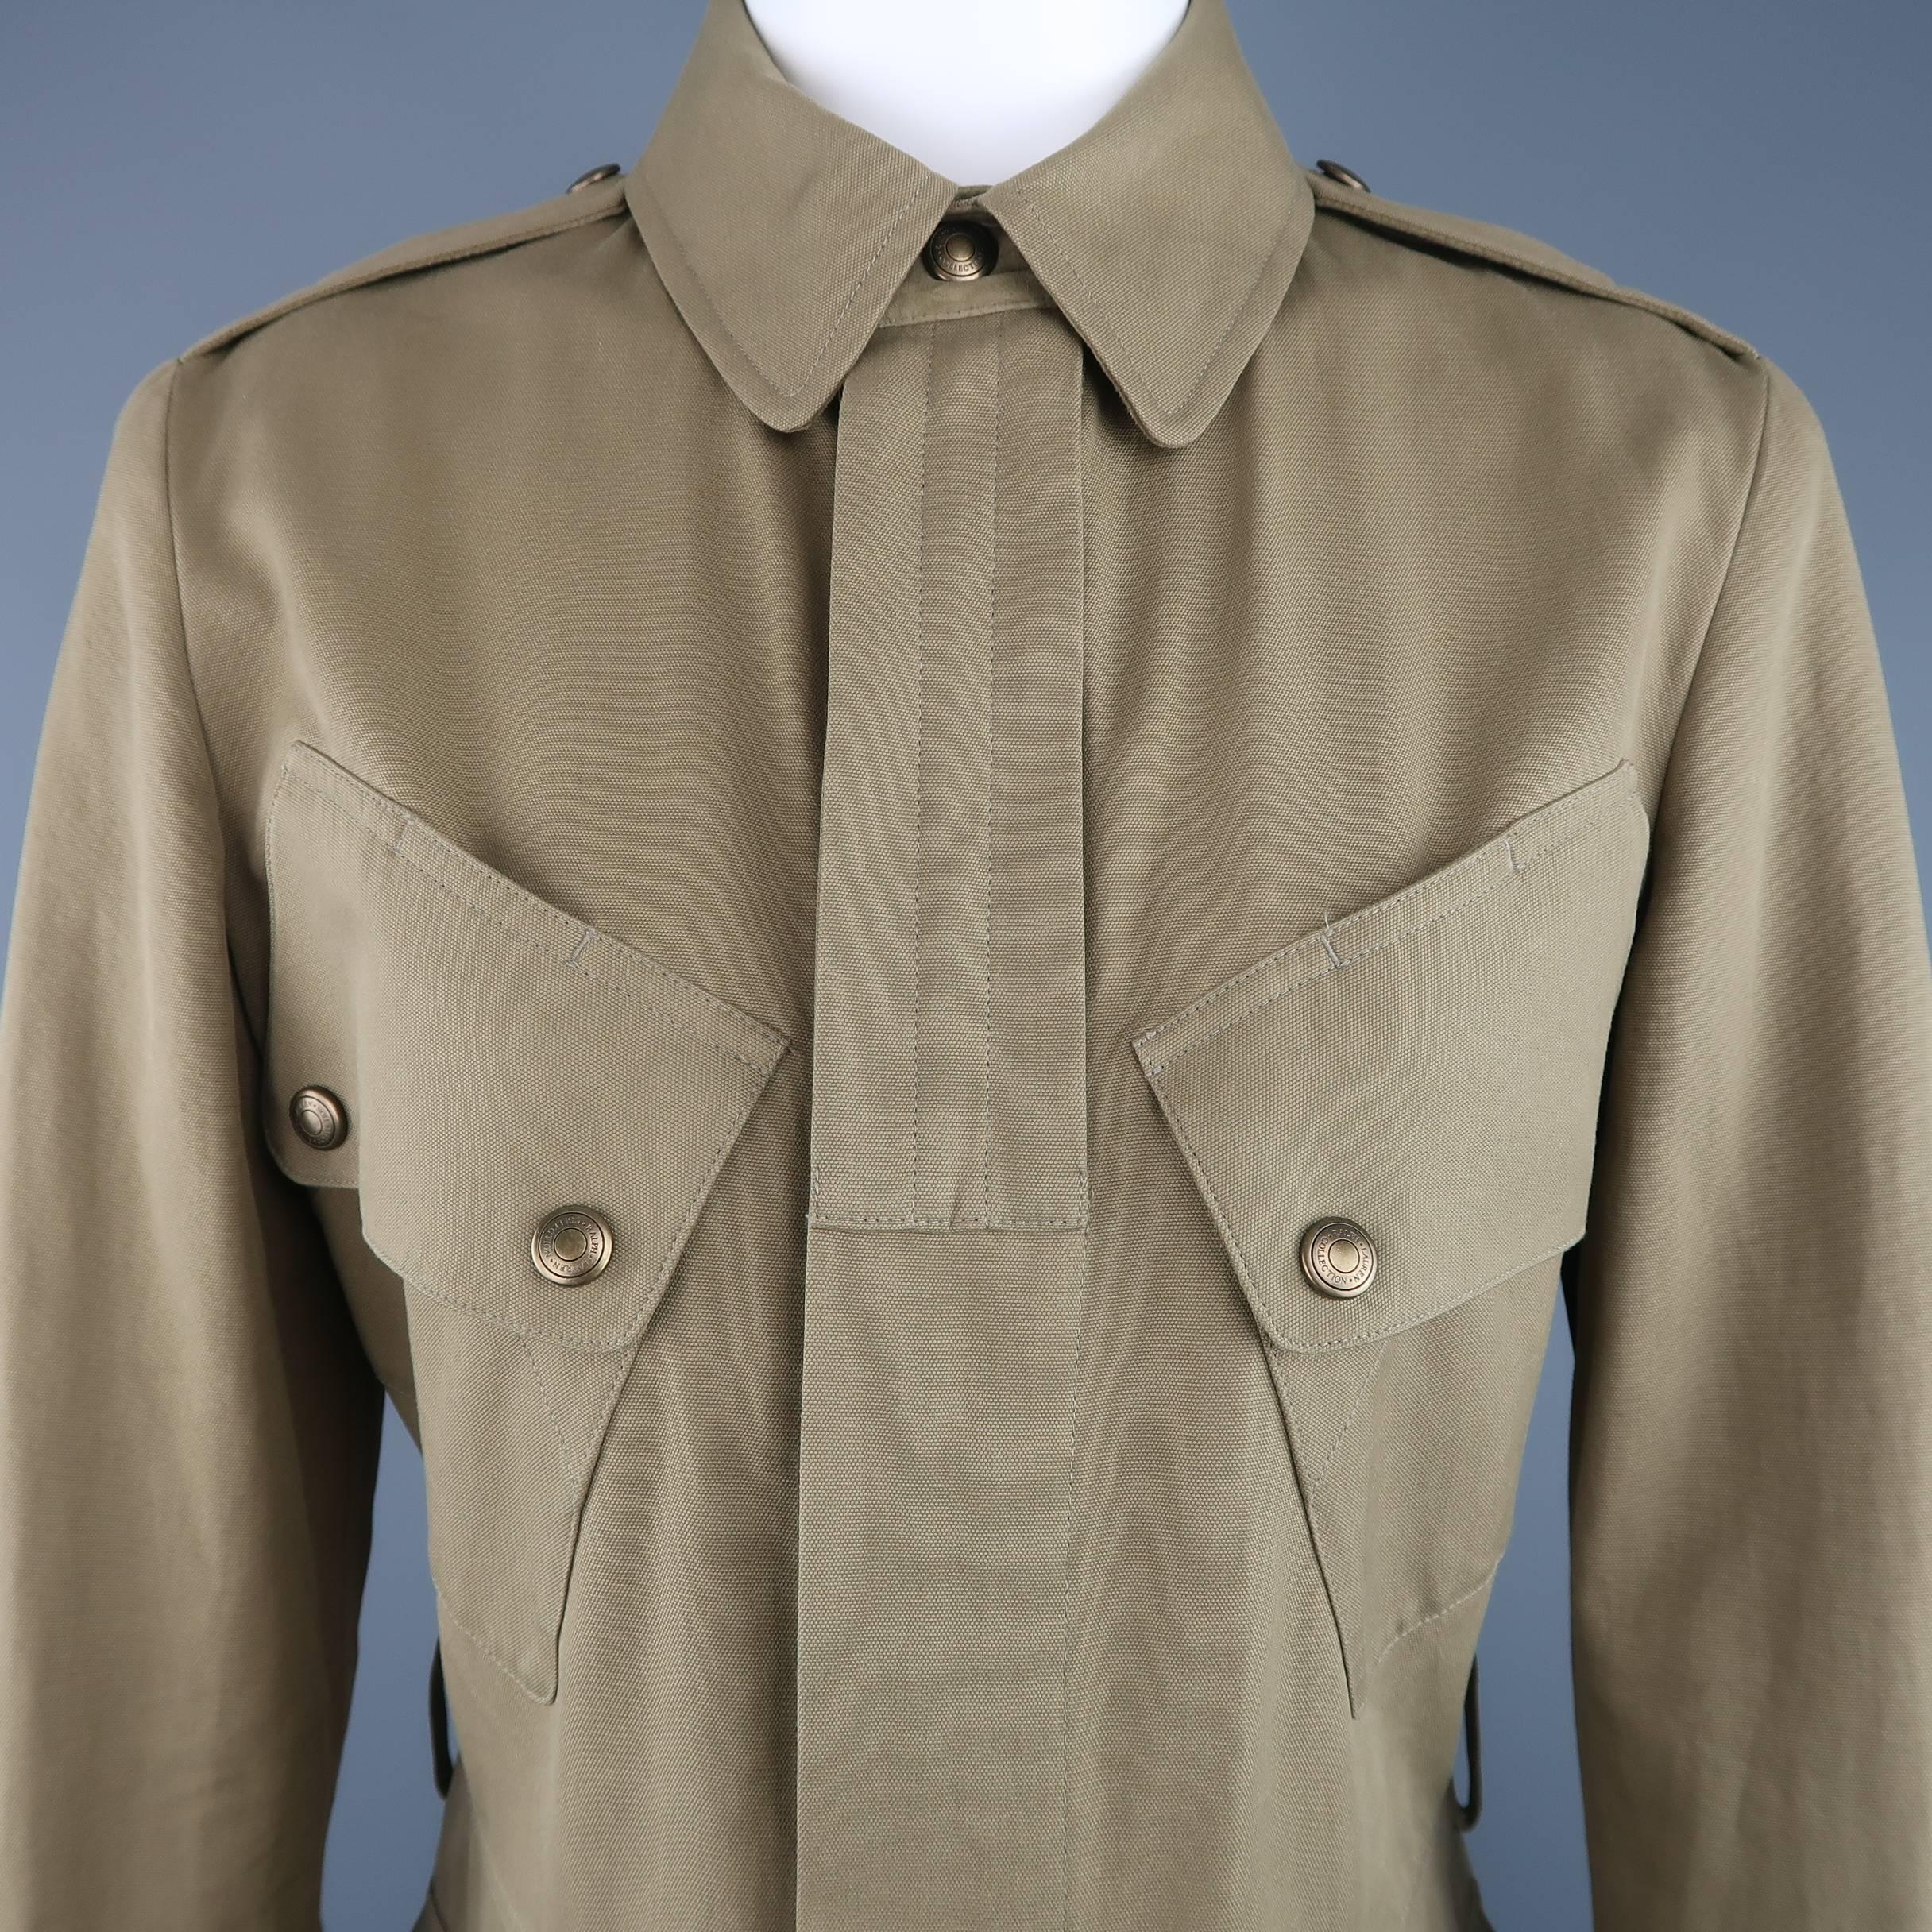 Ralph Lauren Collection safari jacket comes in olive green cotton canvas and features a classic pointed collar, epaulets, hidden placket zip front, slanted patch flap pockets, snap cuffs, and pleated back. Missing belt. As-is.  Made in Italy.
 
Good